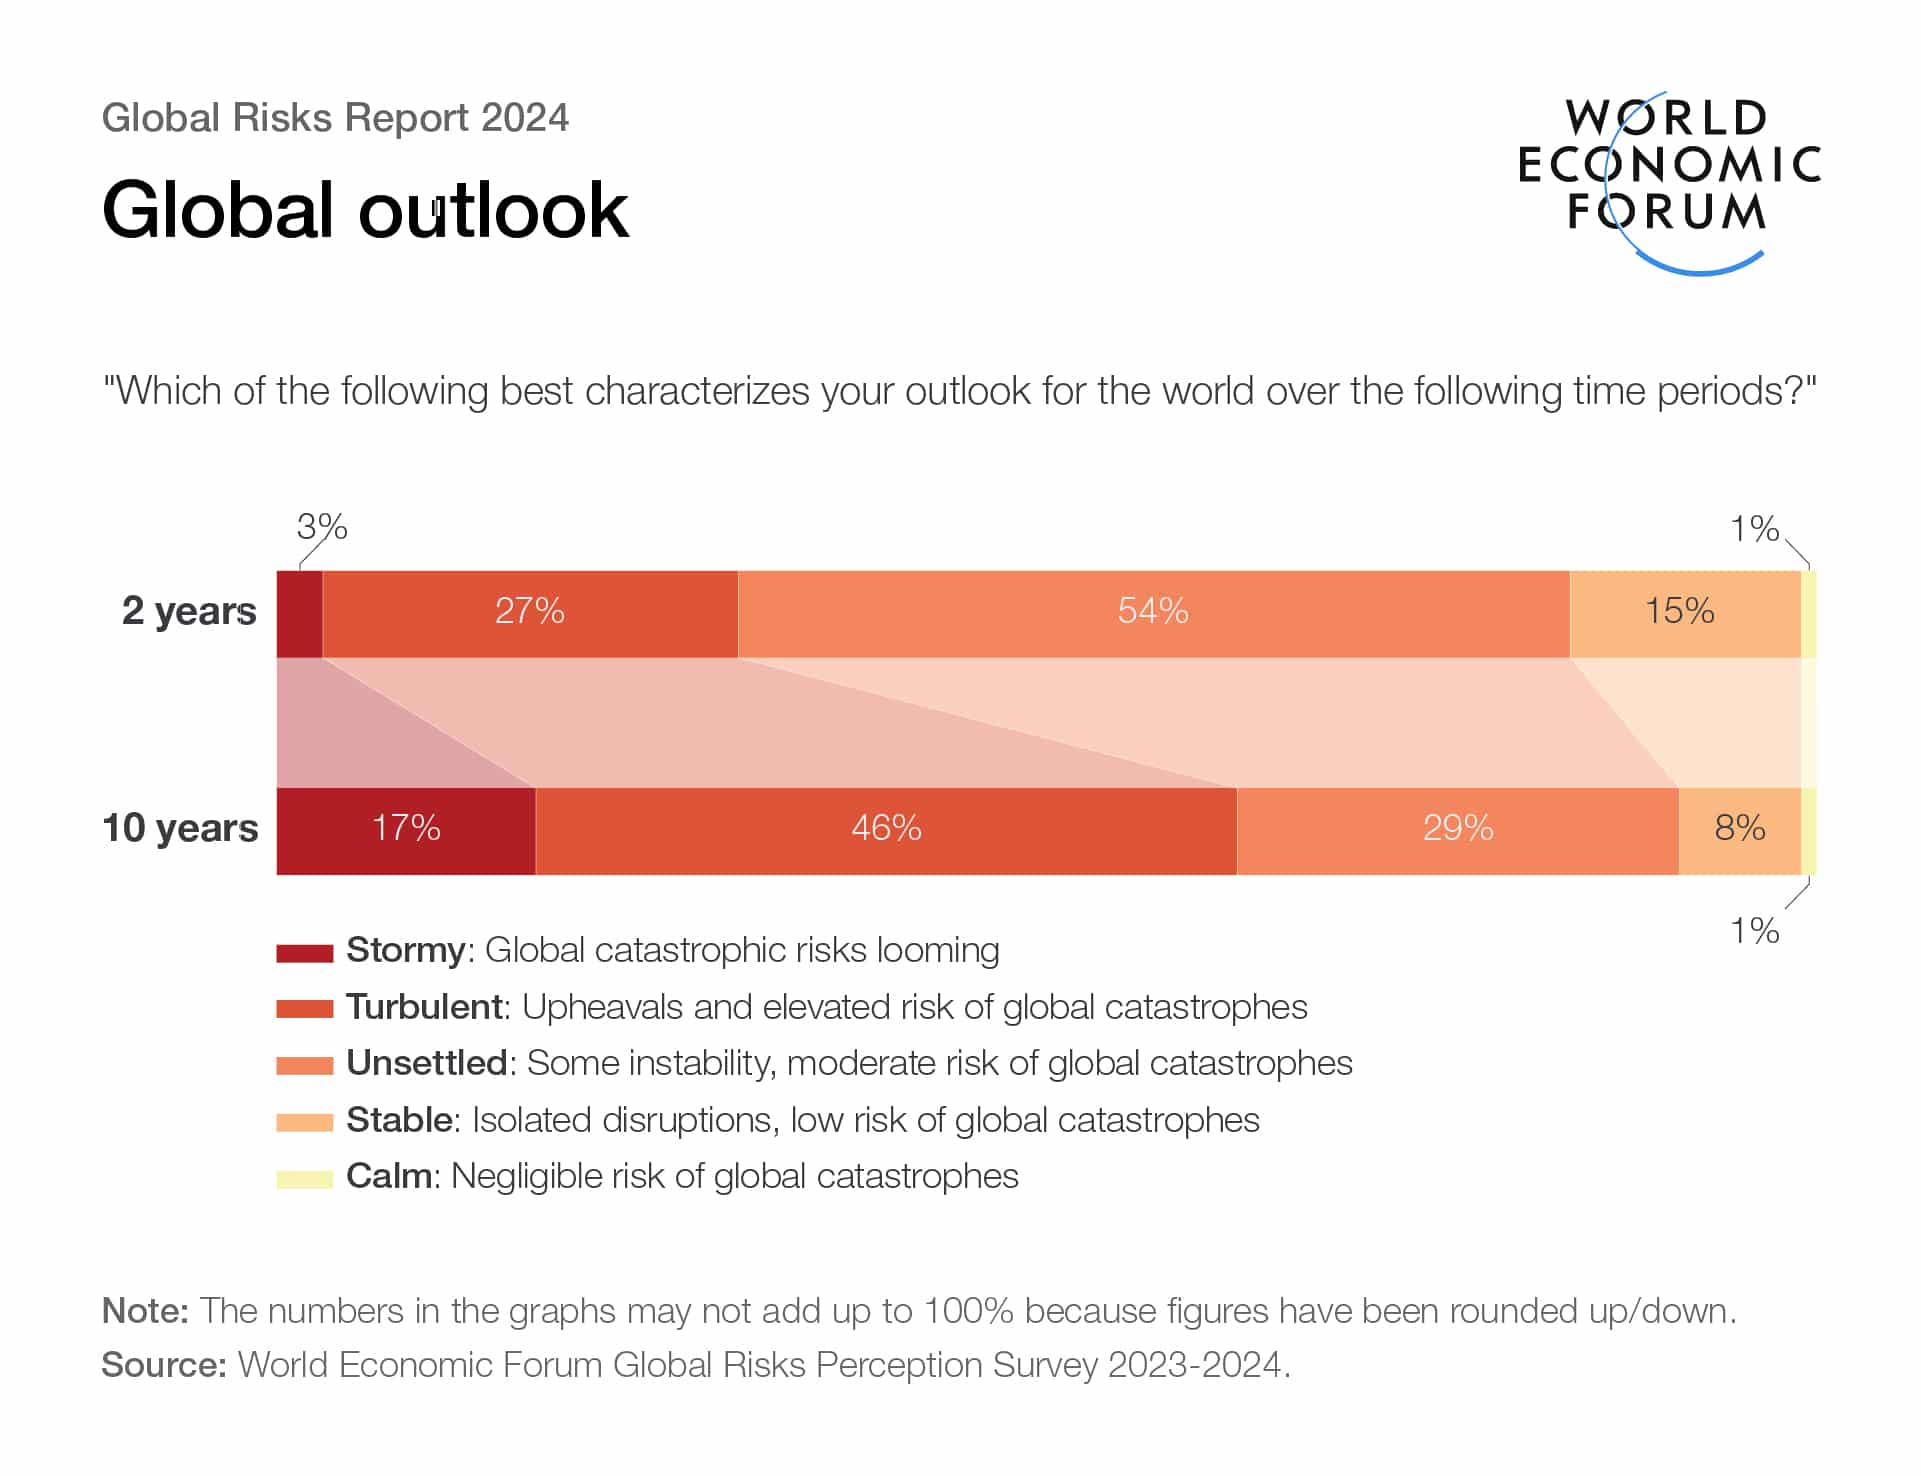 Short and long-term global outlook